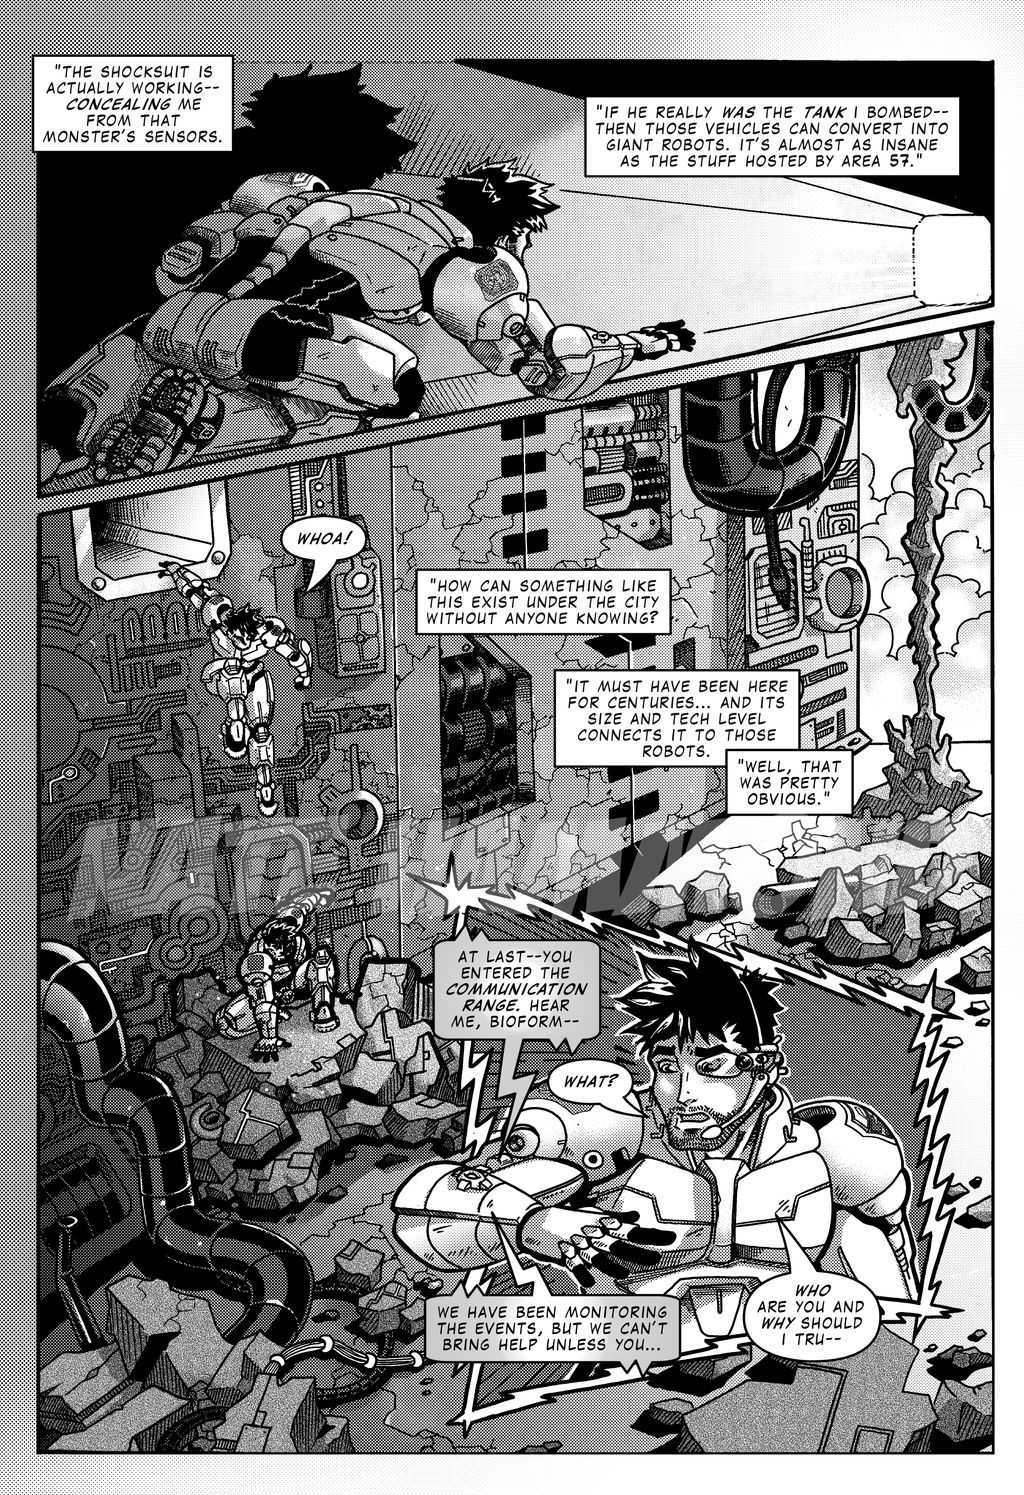 WARBOTRON issue 3, page 6